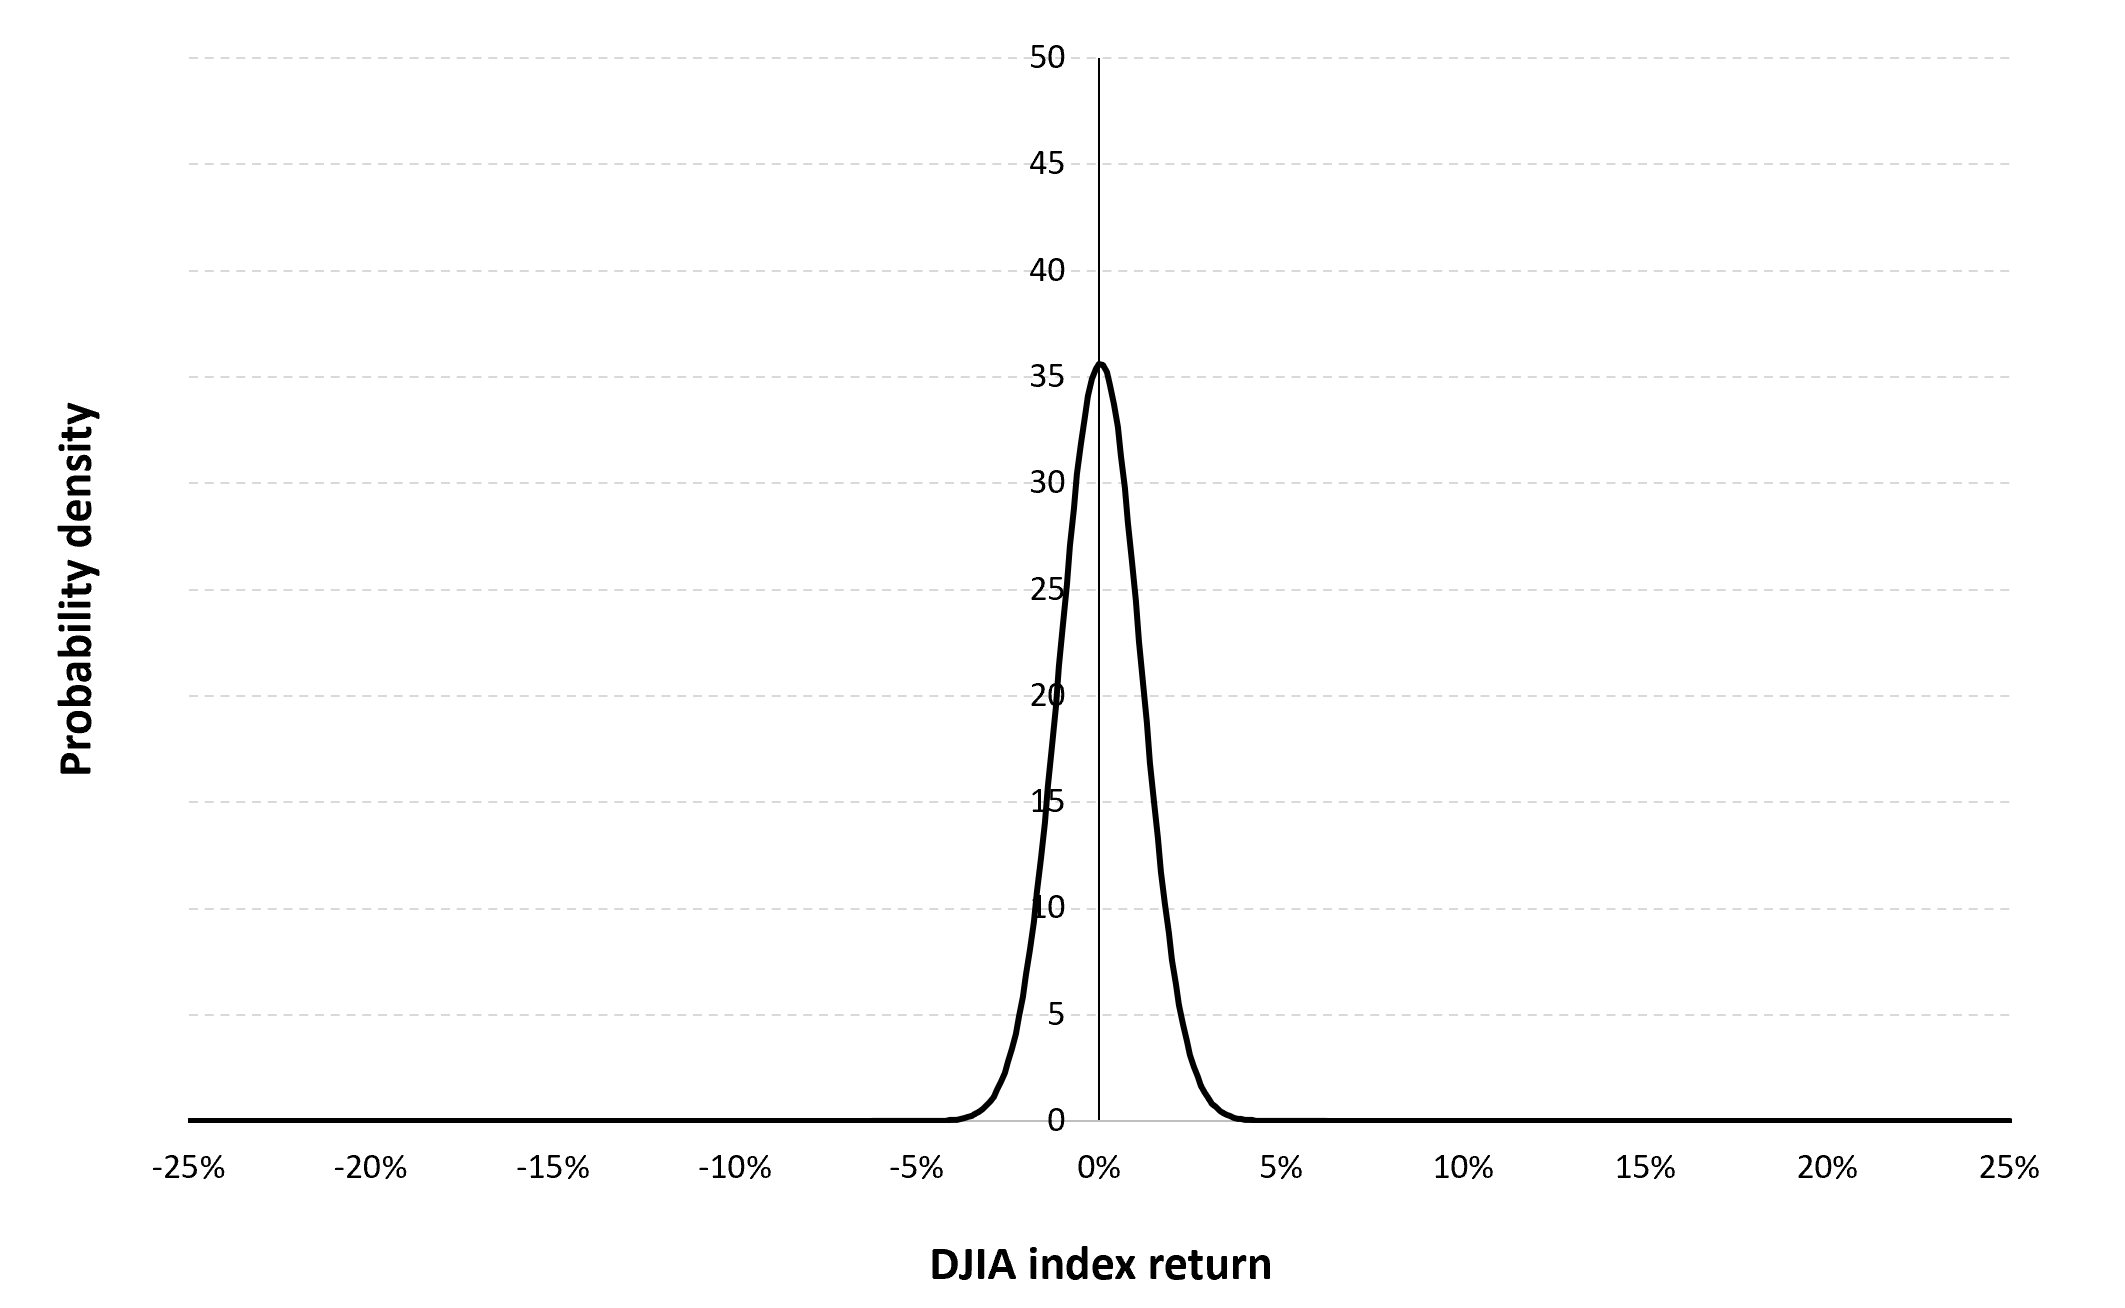 Gaussian distribution of the daily Dow Jones index returns